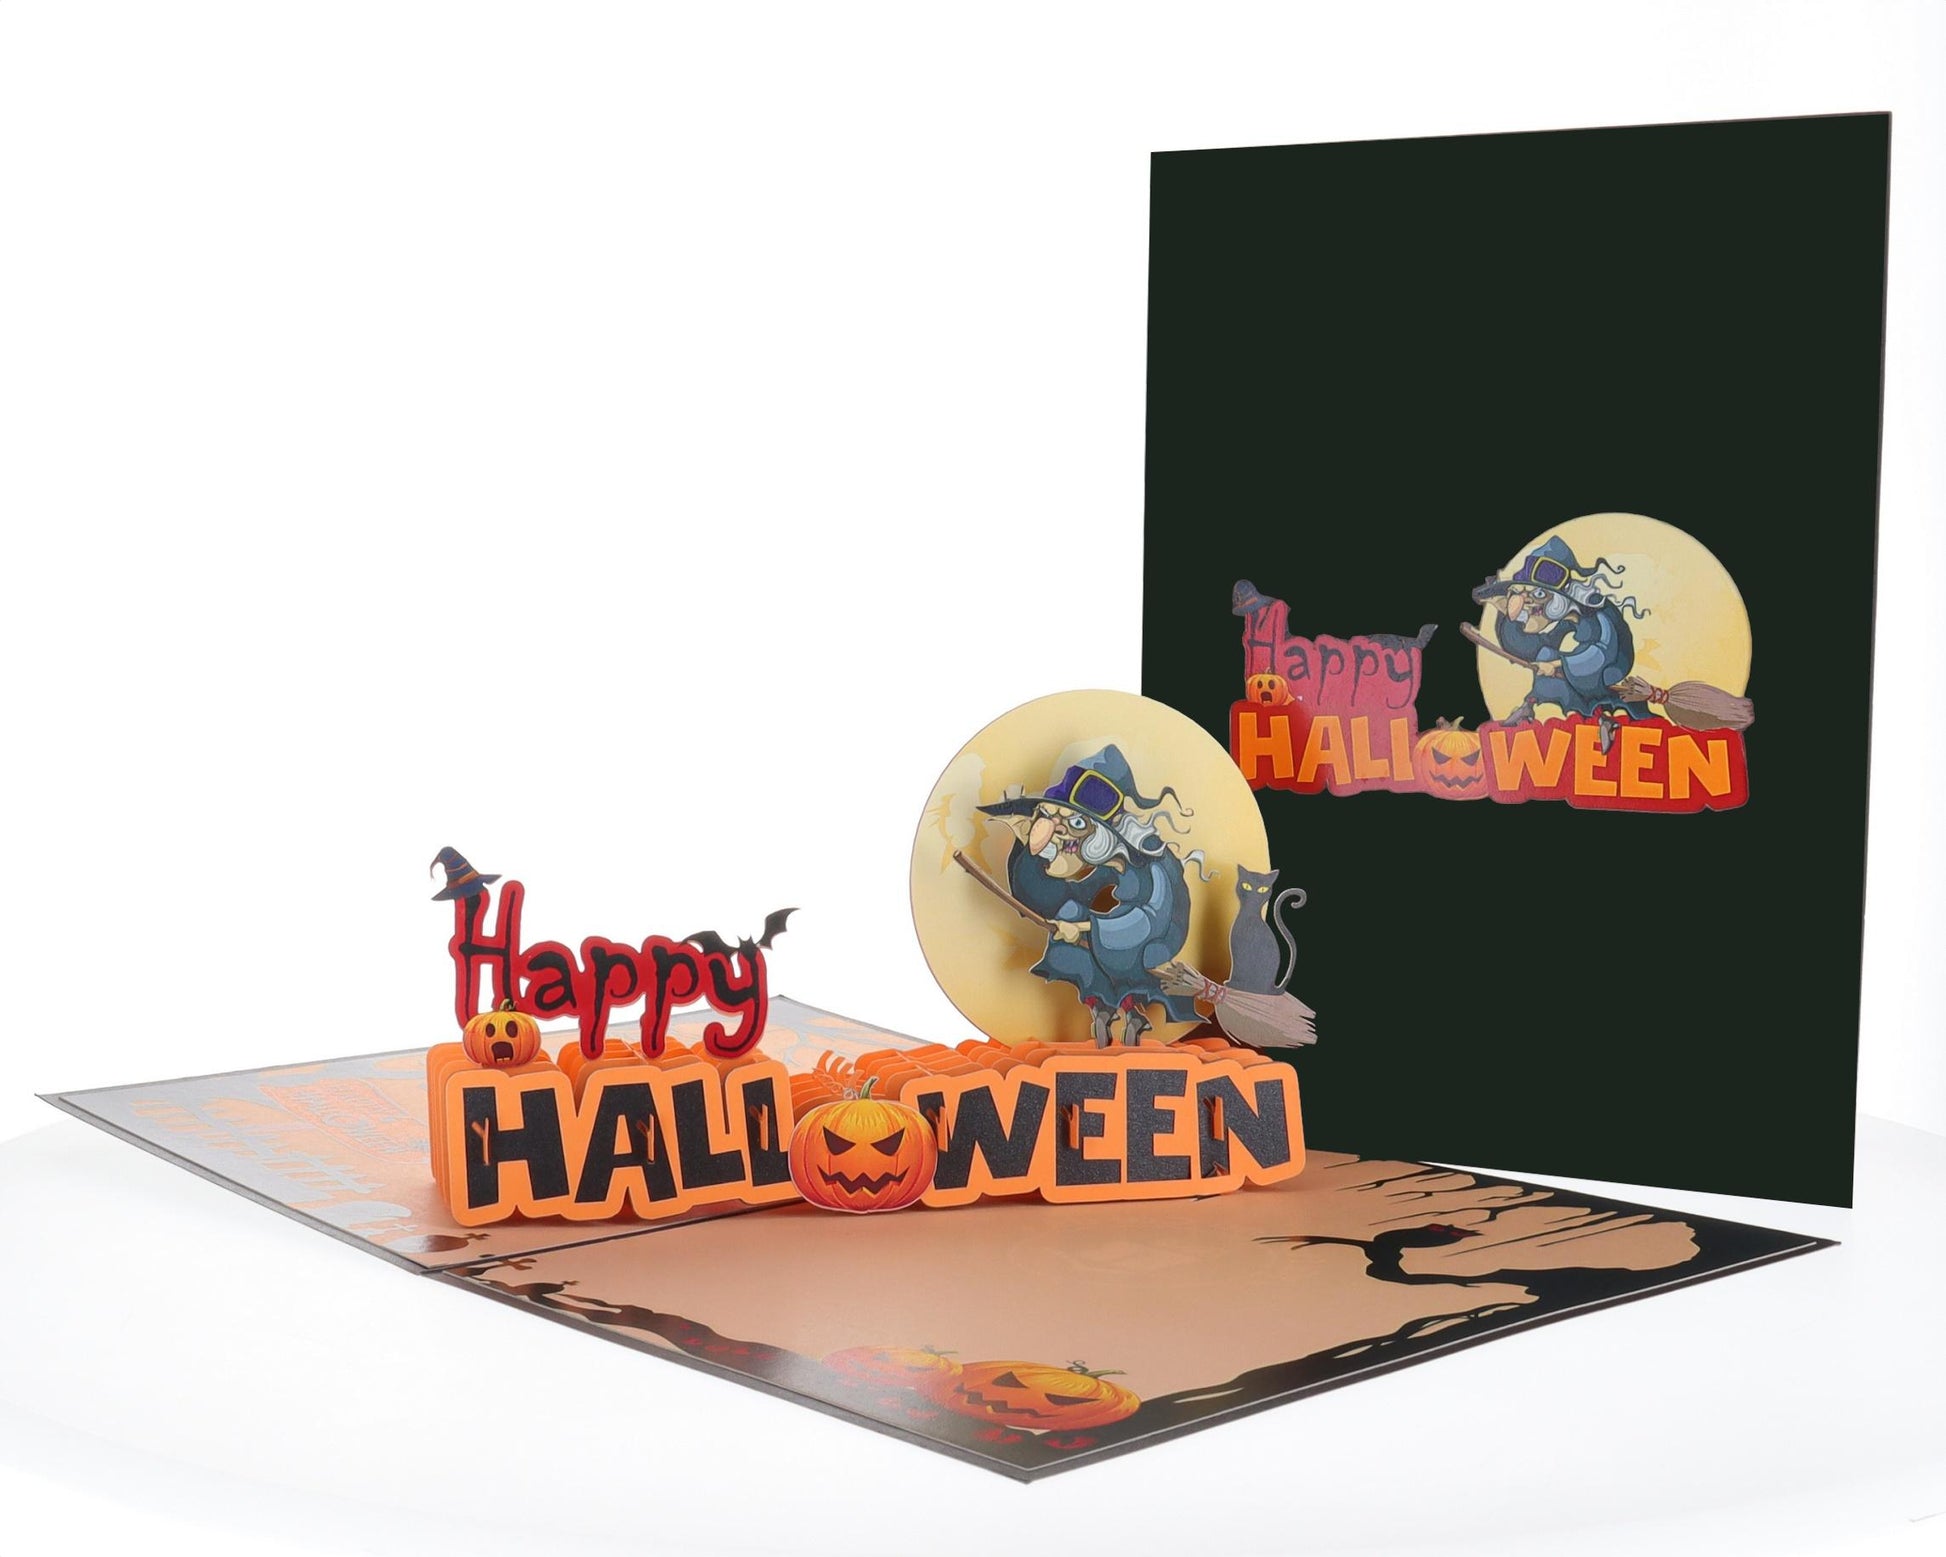 Spooky Wicked Witch With Black Cat Halloween 3D Pop Up Greeting Card - 3d halloween card - Awesome - iGifts And Cards